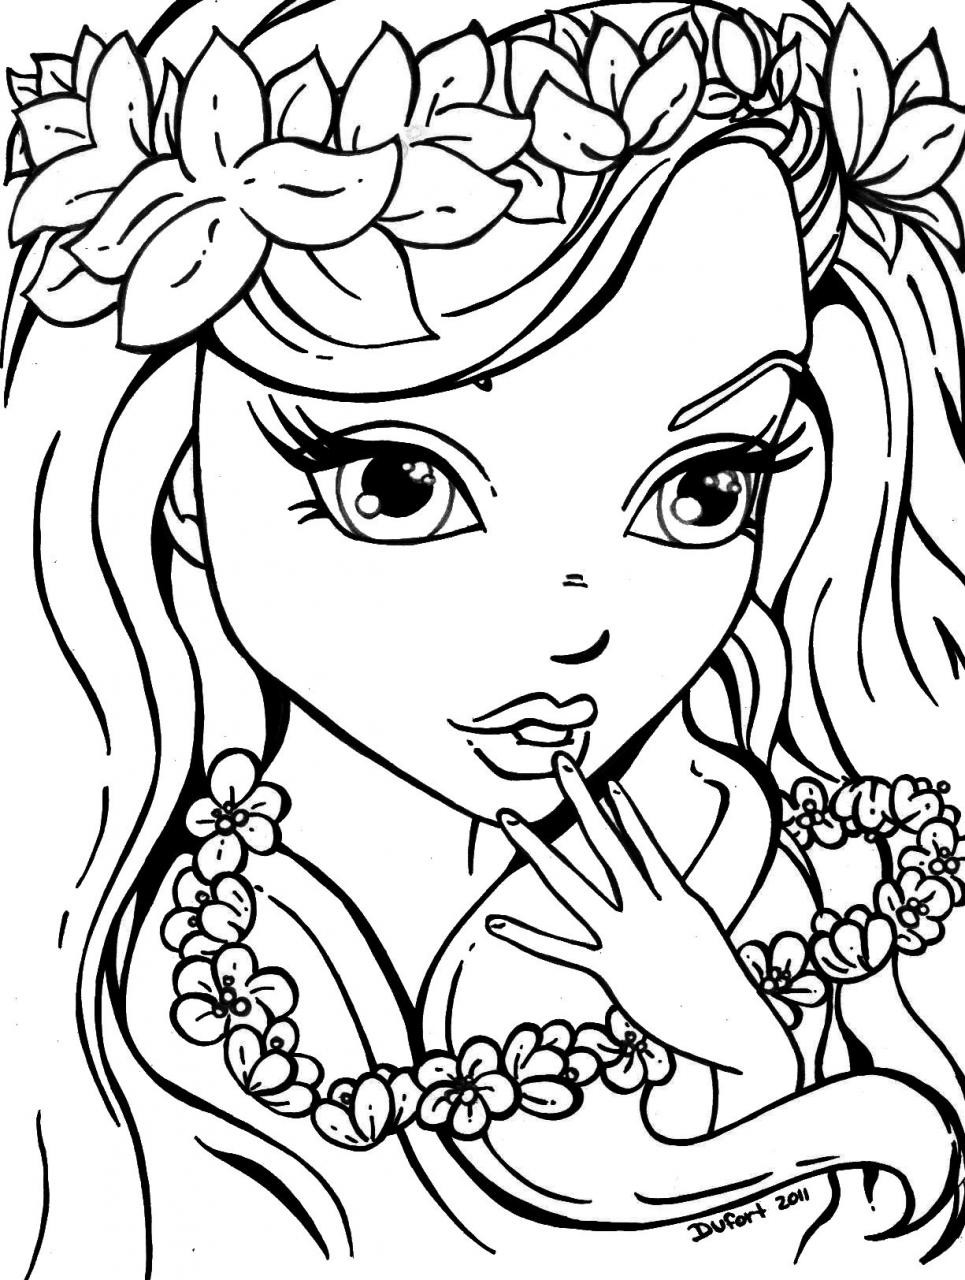 Coloring Sheet For Girls
 Coloring Pages for Girls Best Coloring Pages For Kids